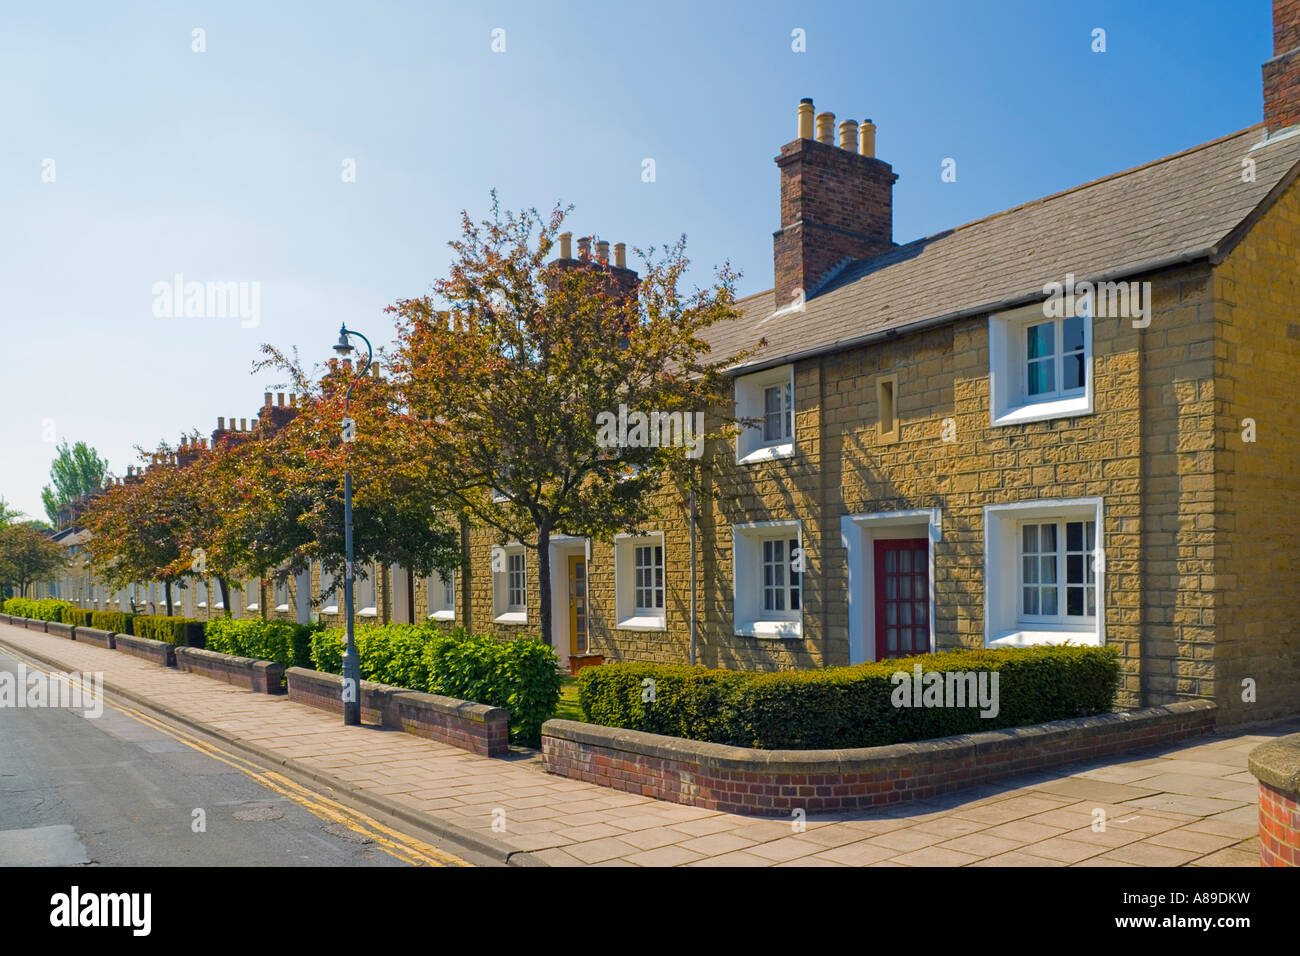 Great Western Railway village Swindon workers houses built with stone from the Box Tunnel near Bath. JMH2864 Stock Photo